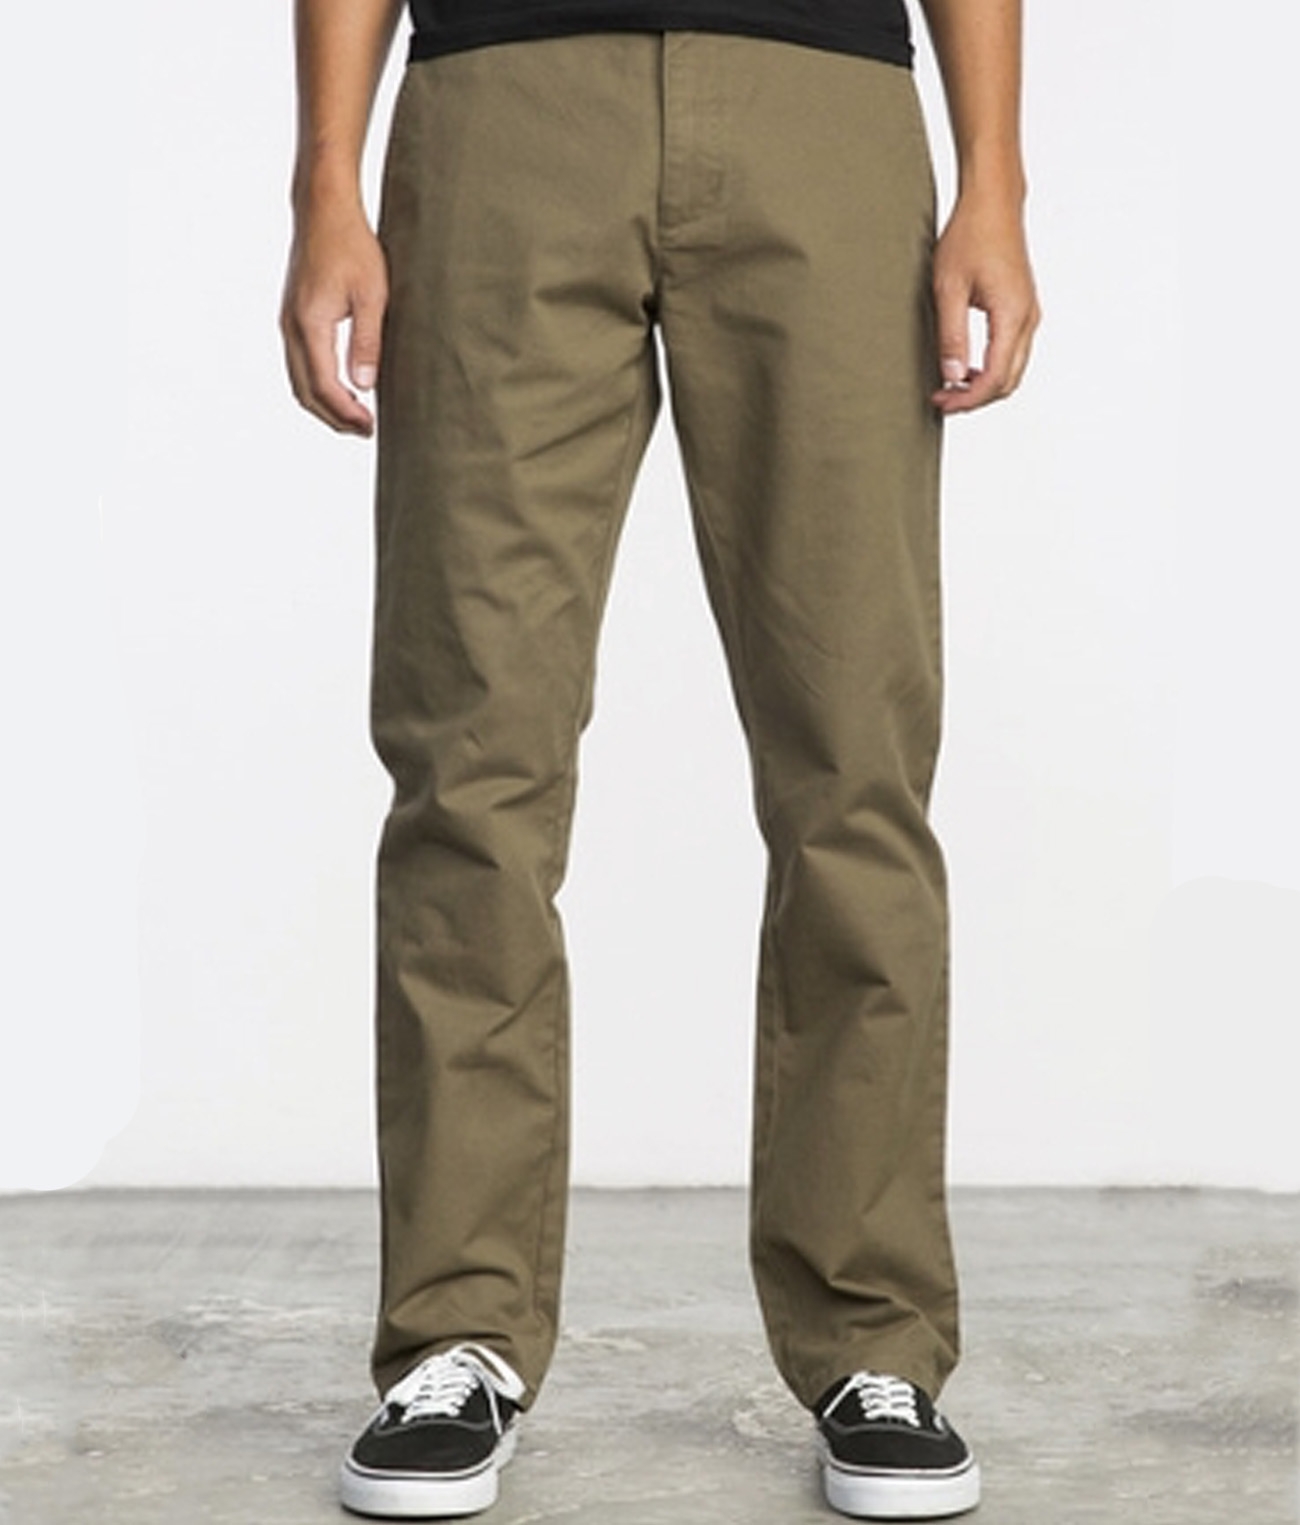 Stay RVCA Pant